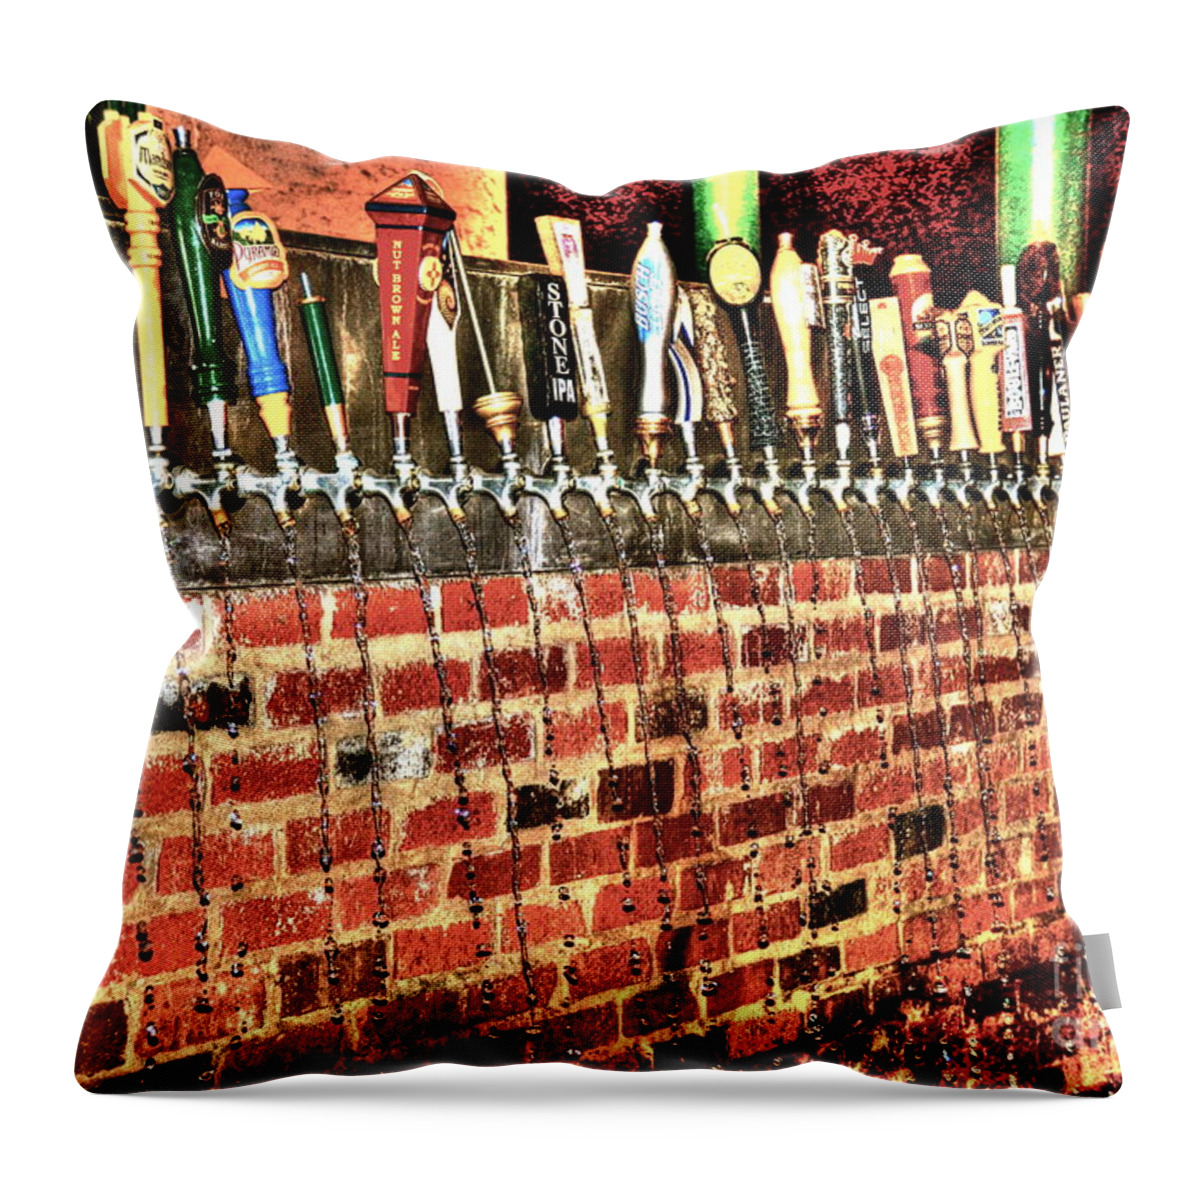 Beer Throw Pillow featuring the photograph Chug by Debbi Granruth